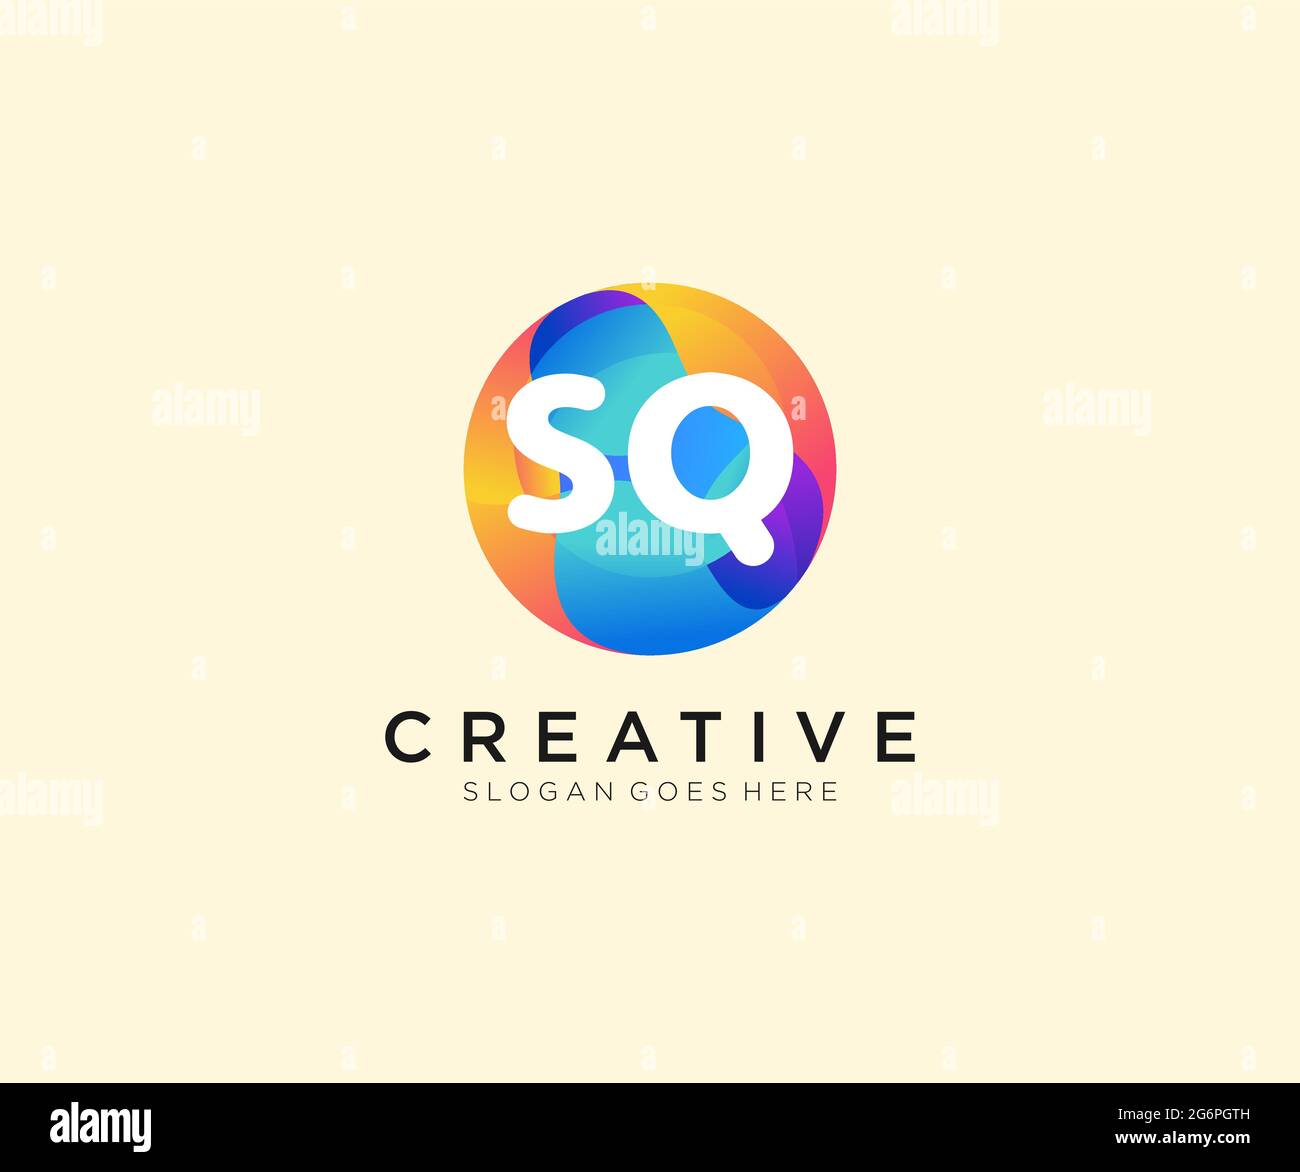 SQ initial logo With Colorful Circle template Stock Vector